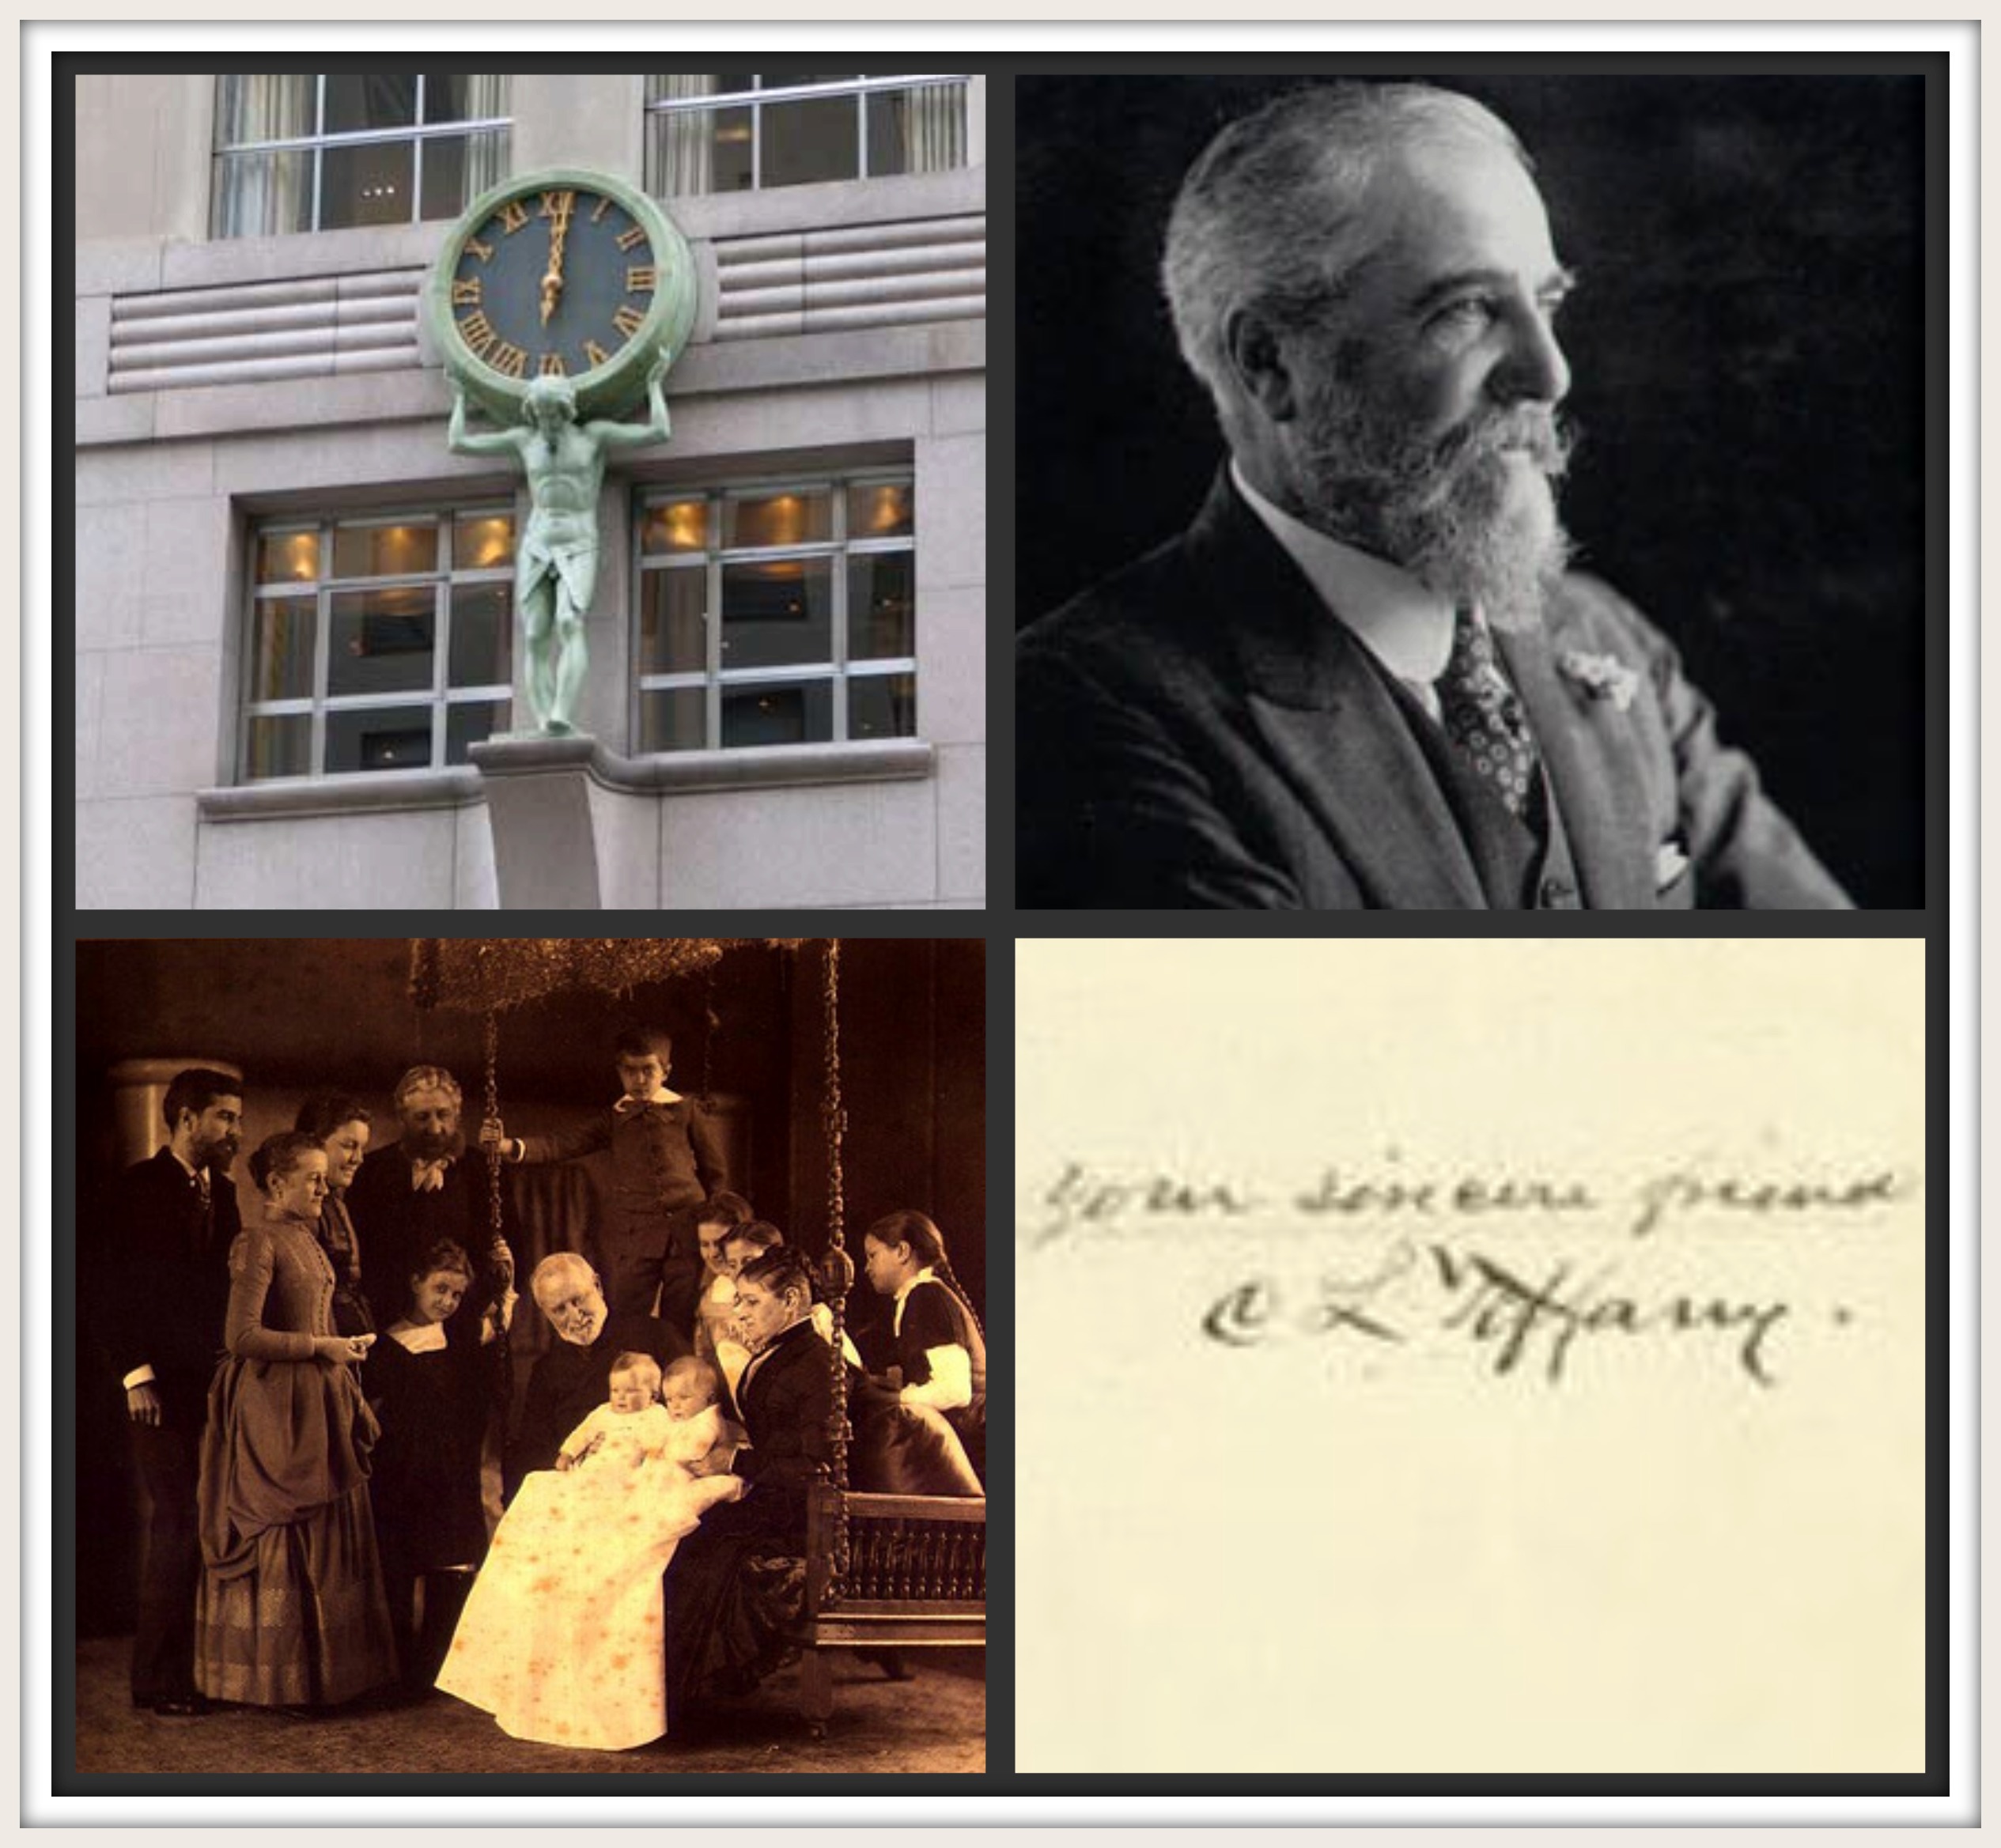 Charming Gentleman: Charles Lewis Tiffany and History of & Co. | Oh Lovely Lolo